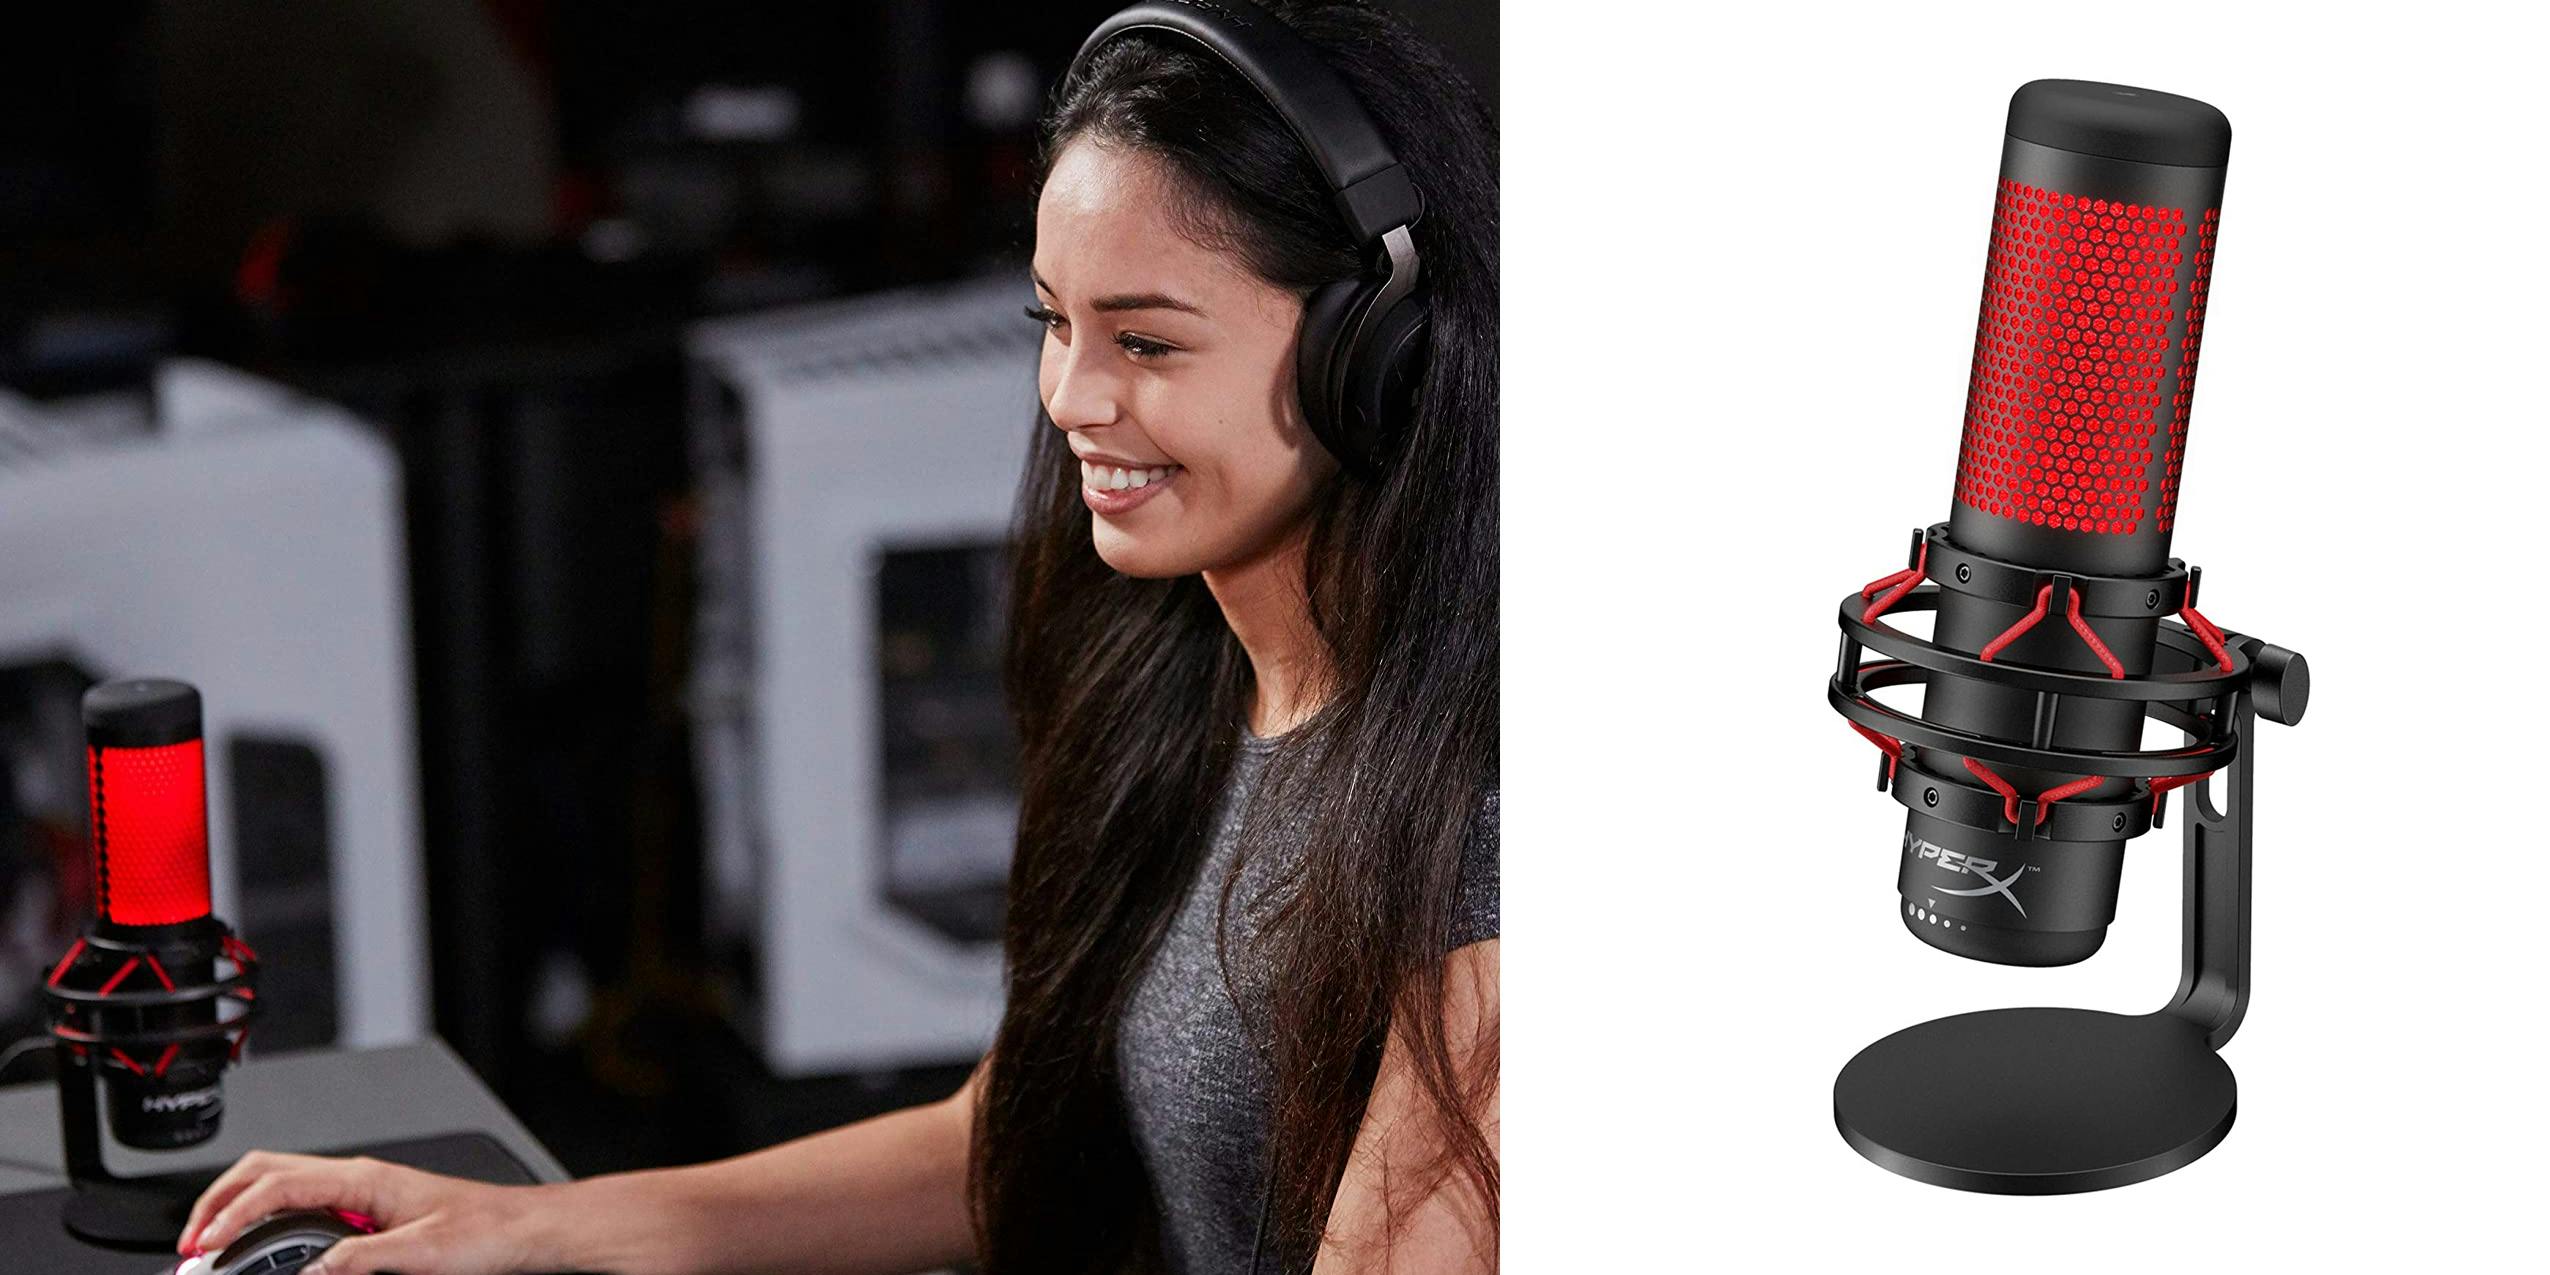 HyperX Quadcast being used be a gamer along with a product image of the microphone.